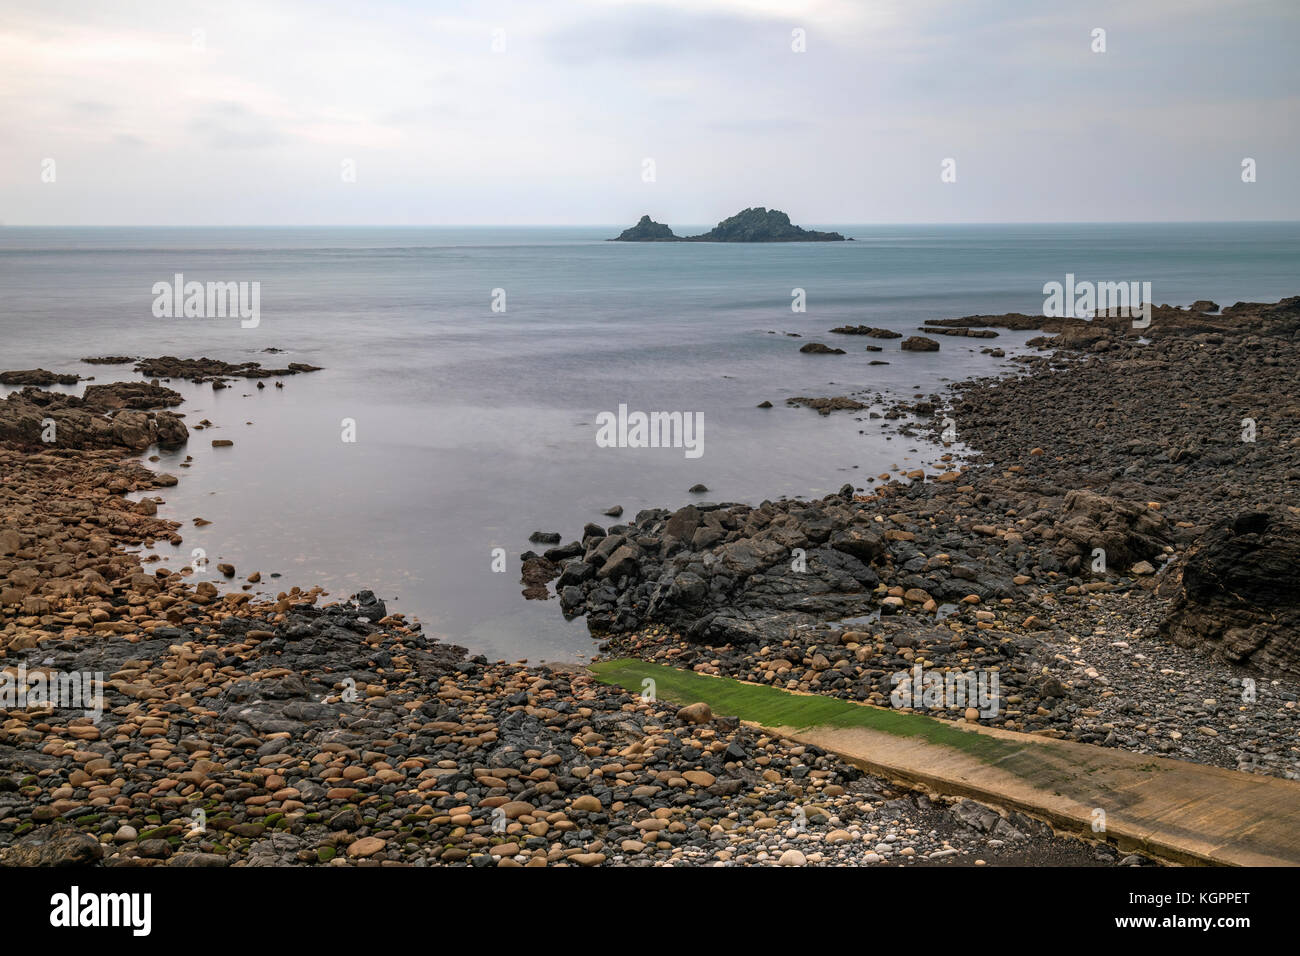 Cape Cornwall, St Just, Cornwall, England, UK Banque D'Images